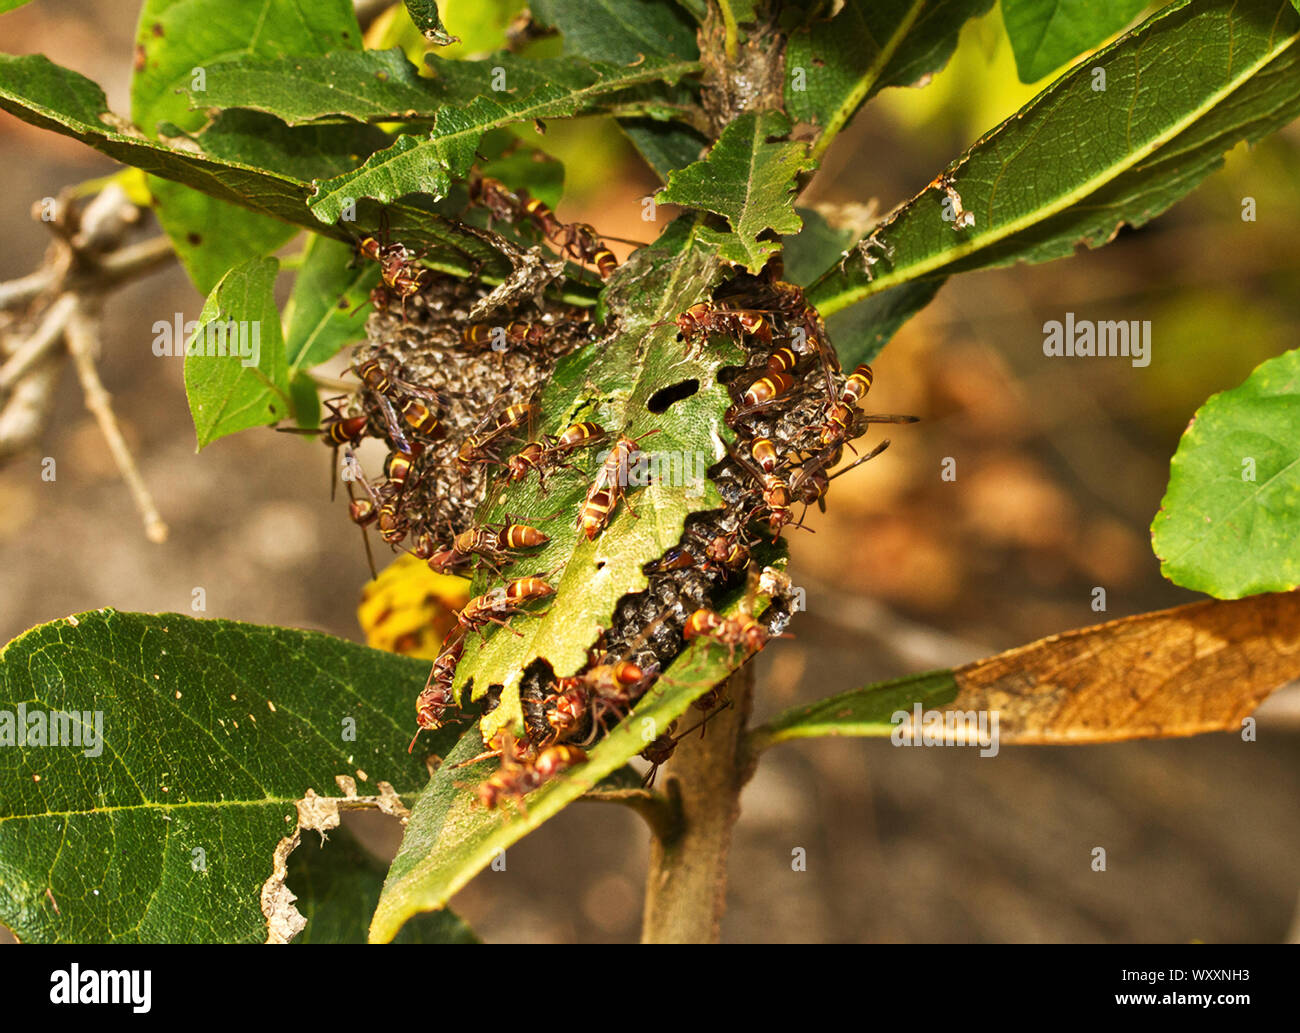 A colony of Polistes Paper Wasps guard the nest co-operatively to protect the larvae from other mauraudeing predators. Stock Photo